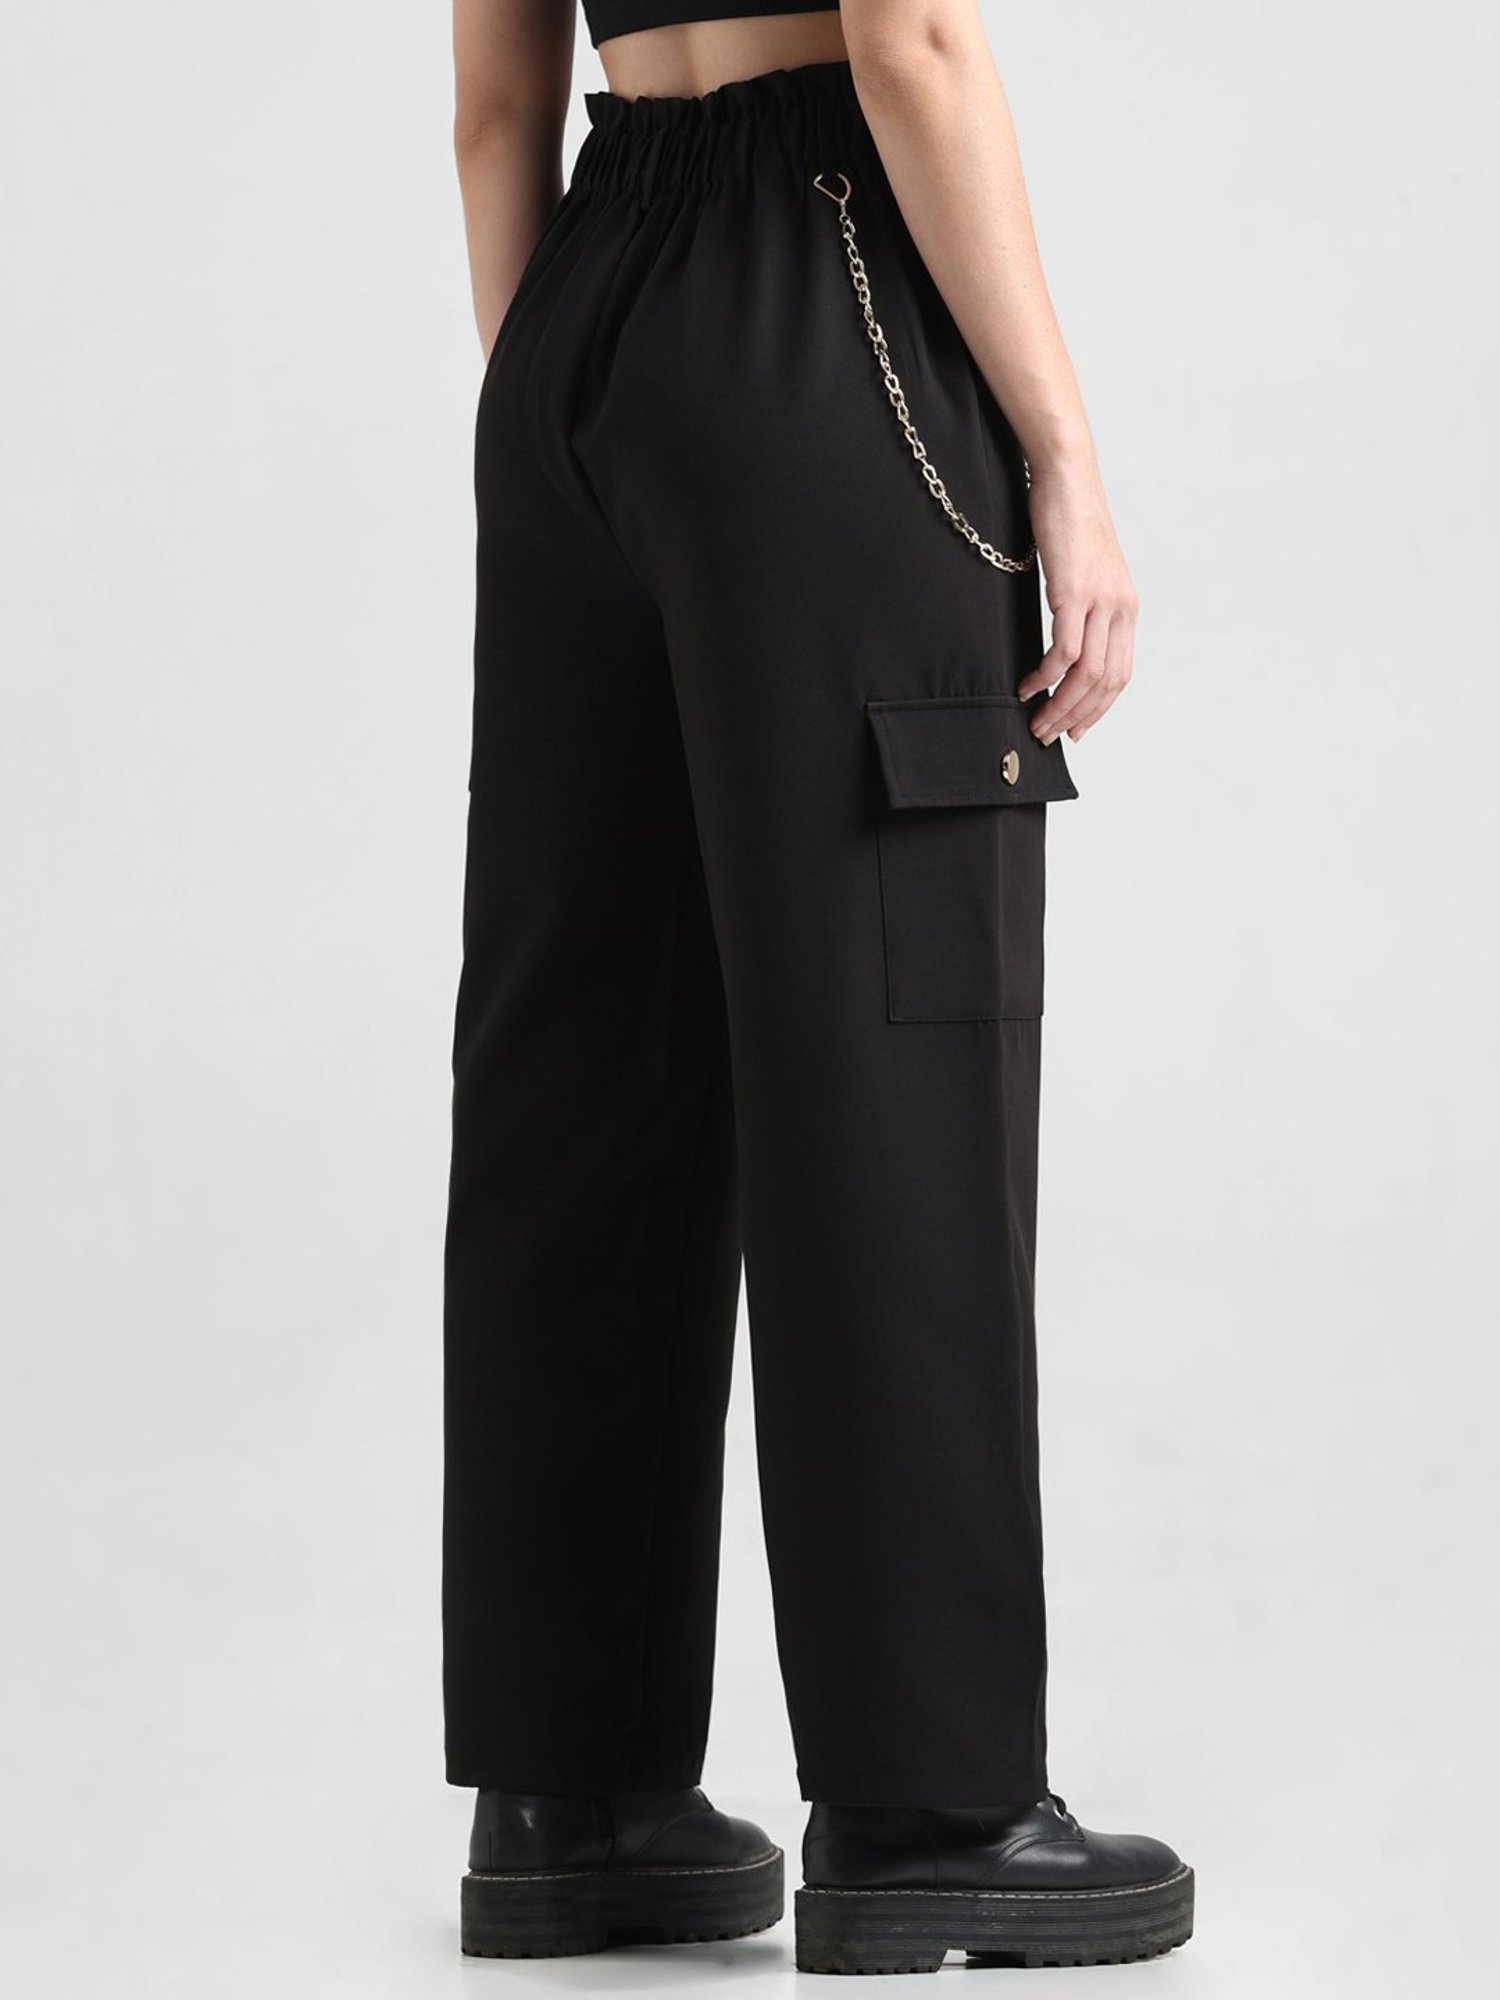 Trendy High Waist Cargo Pants with a Stylish Metal Chain